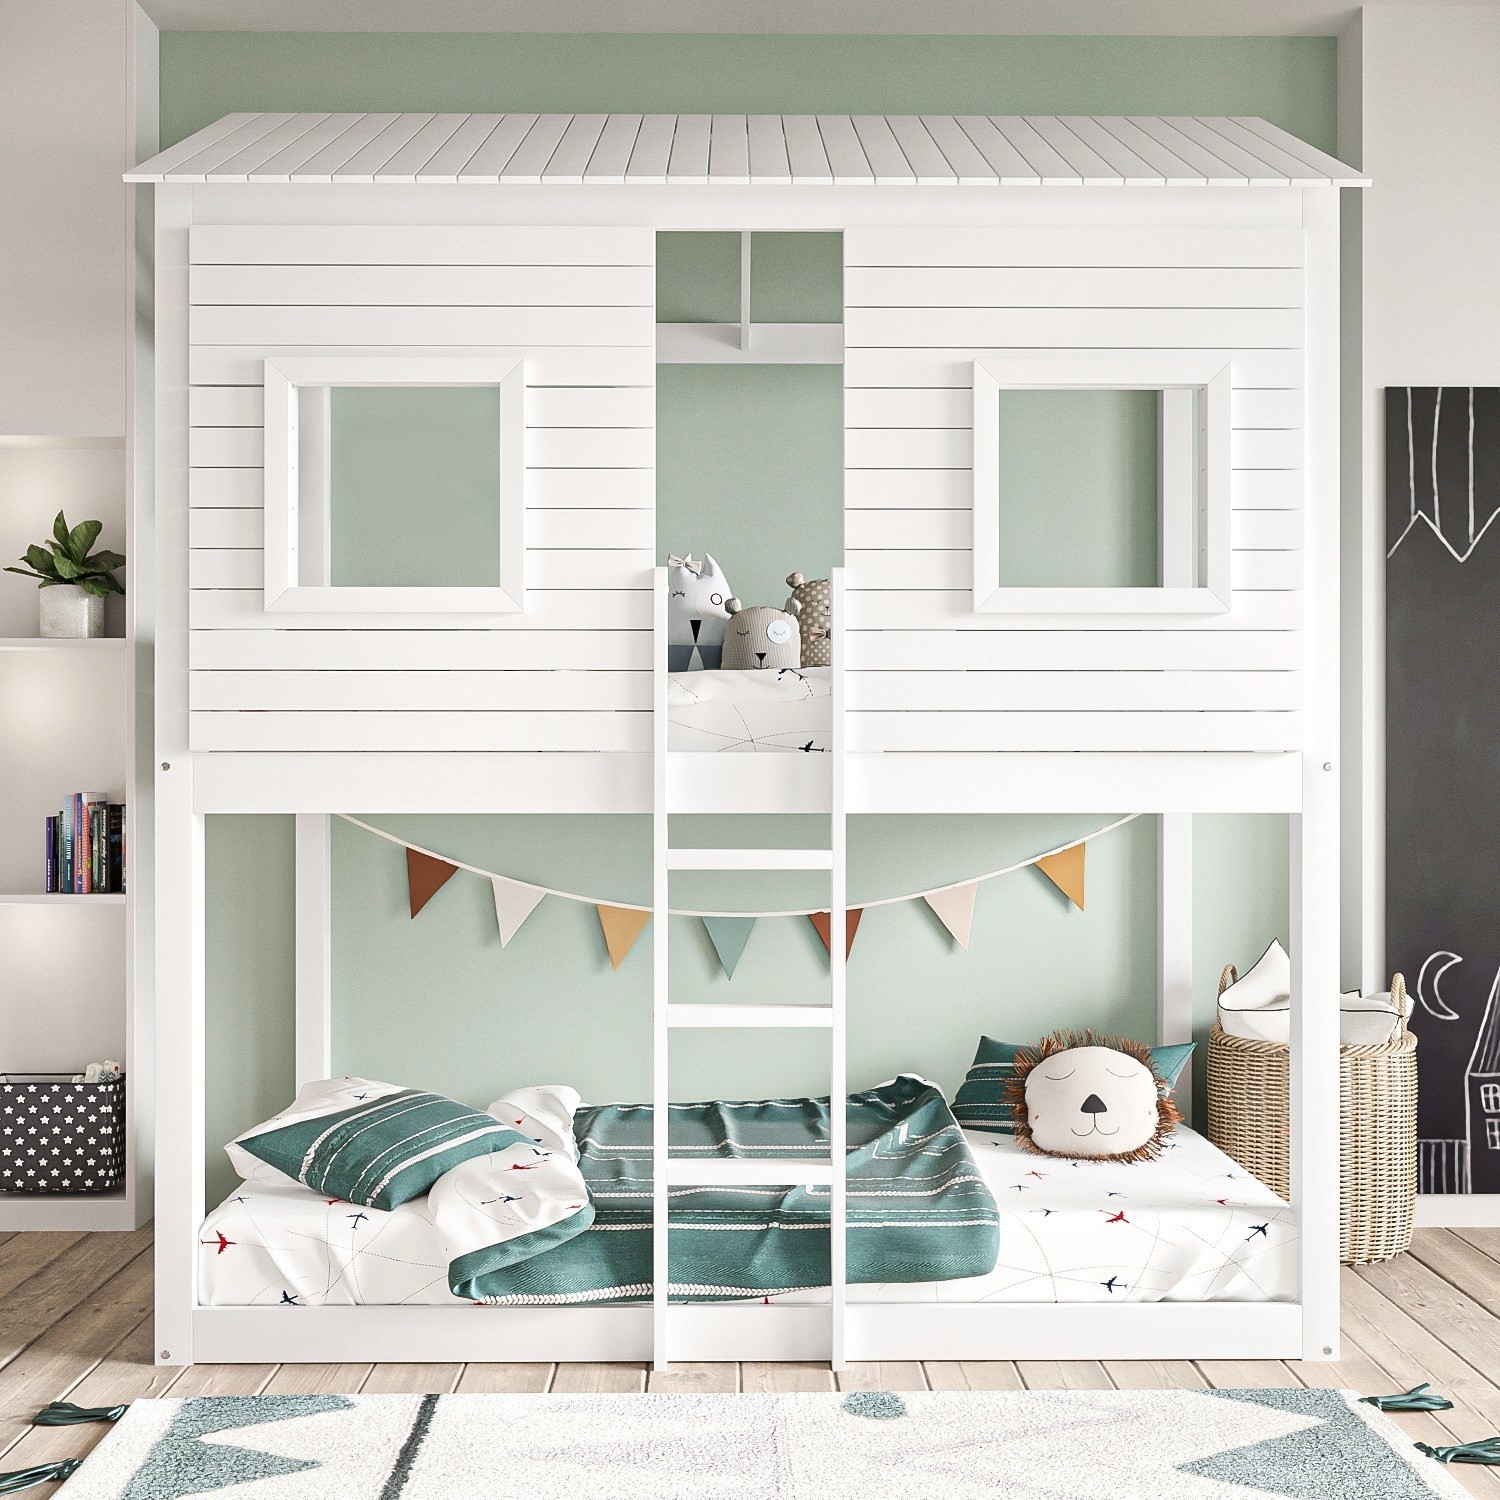 Photo of House bunk bed in white - jasper